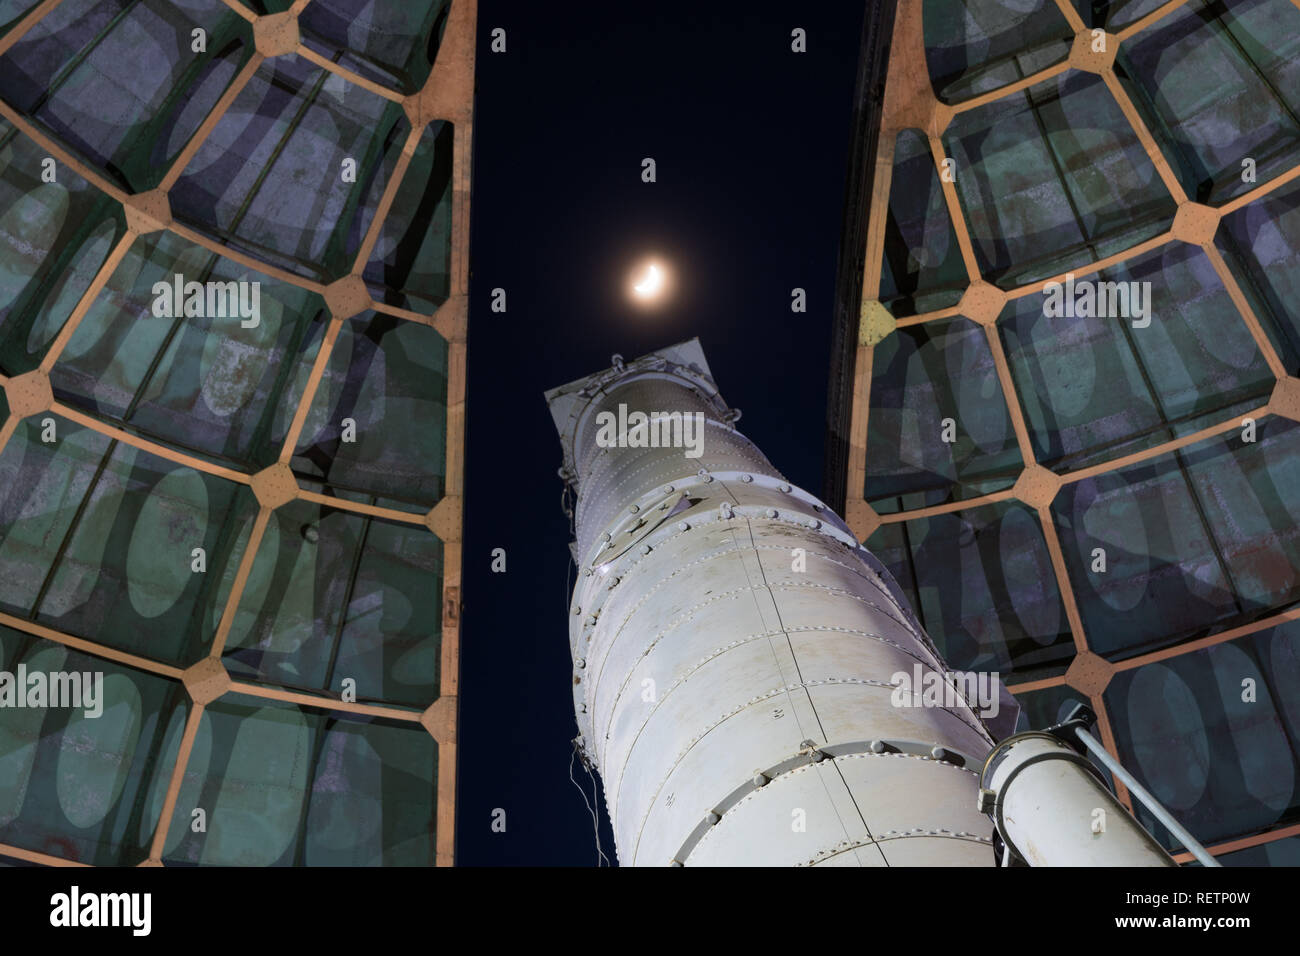 Old telescope looking towards the moon through the opened dome of an observatory Stock Photo